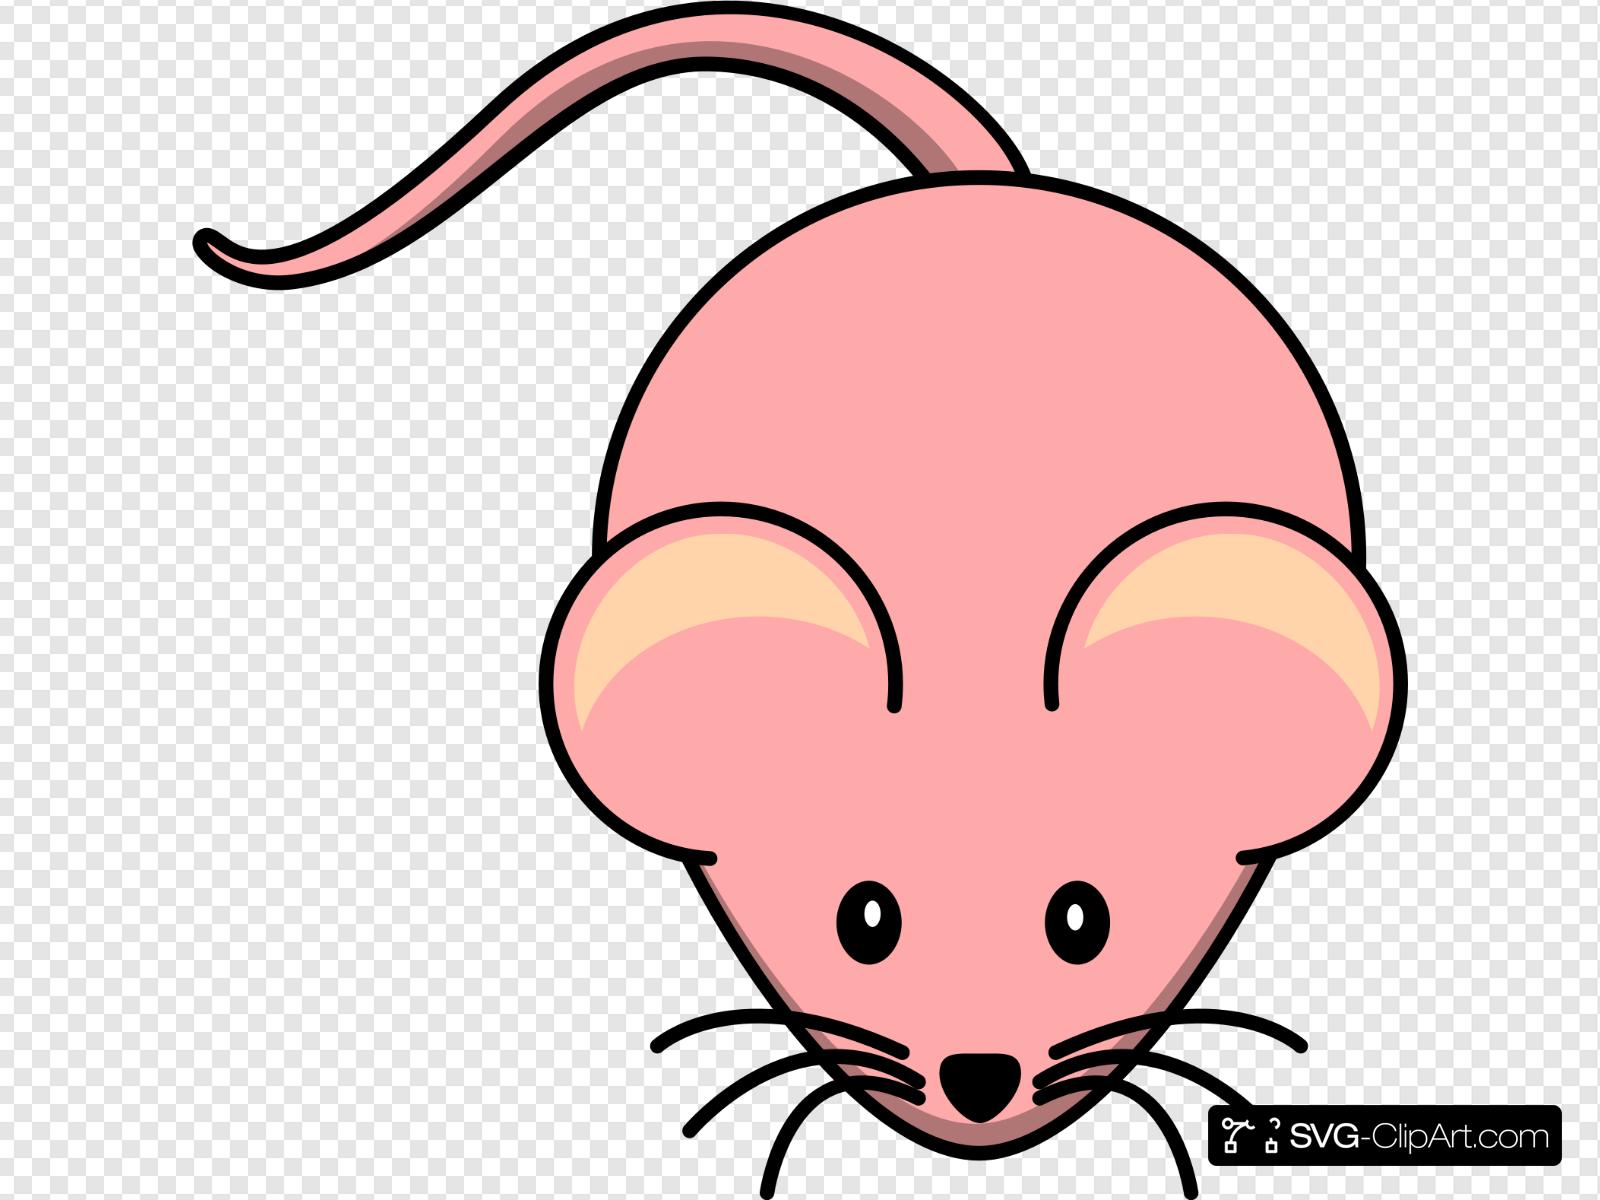 mouse clipart pink